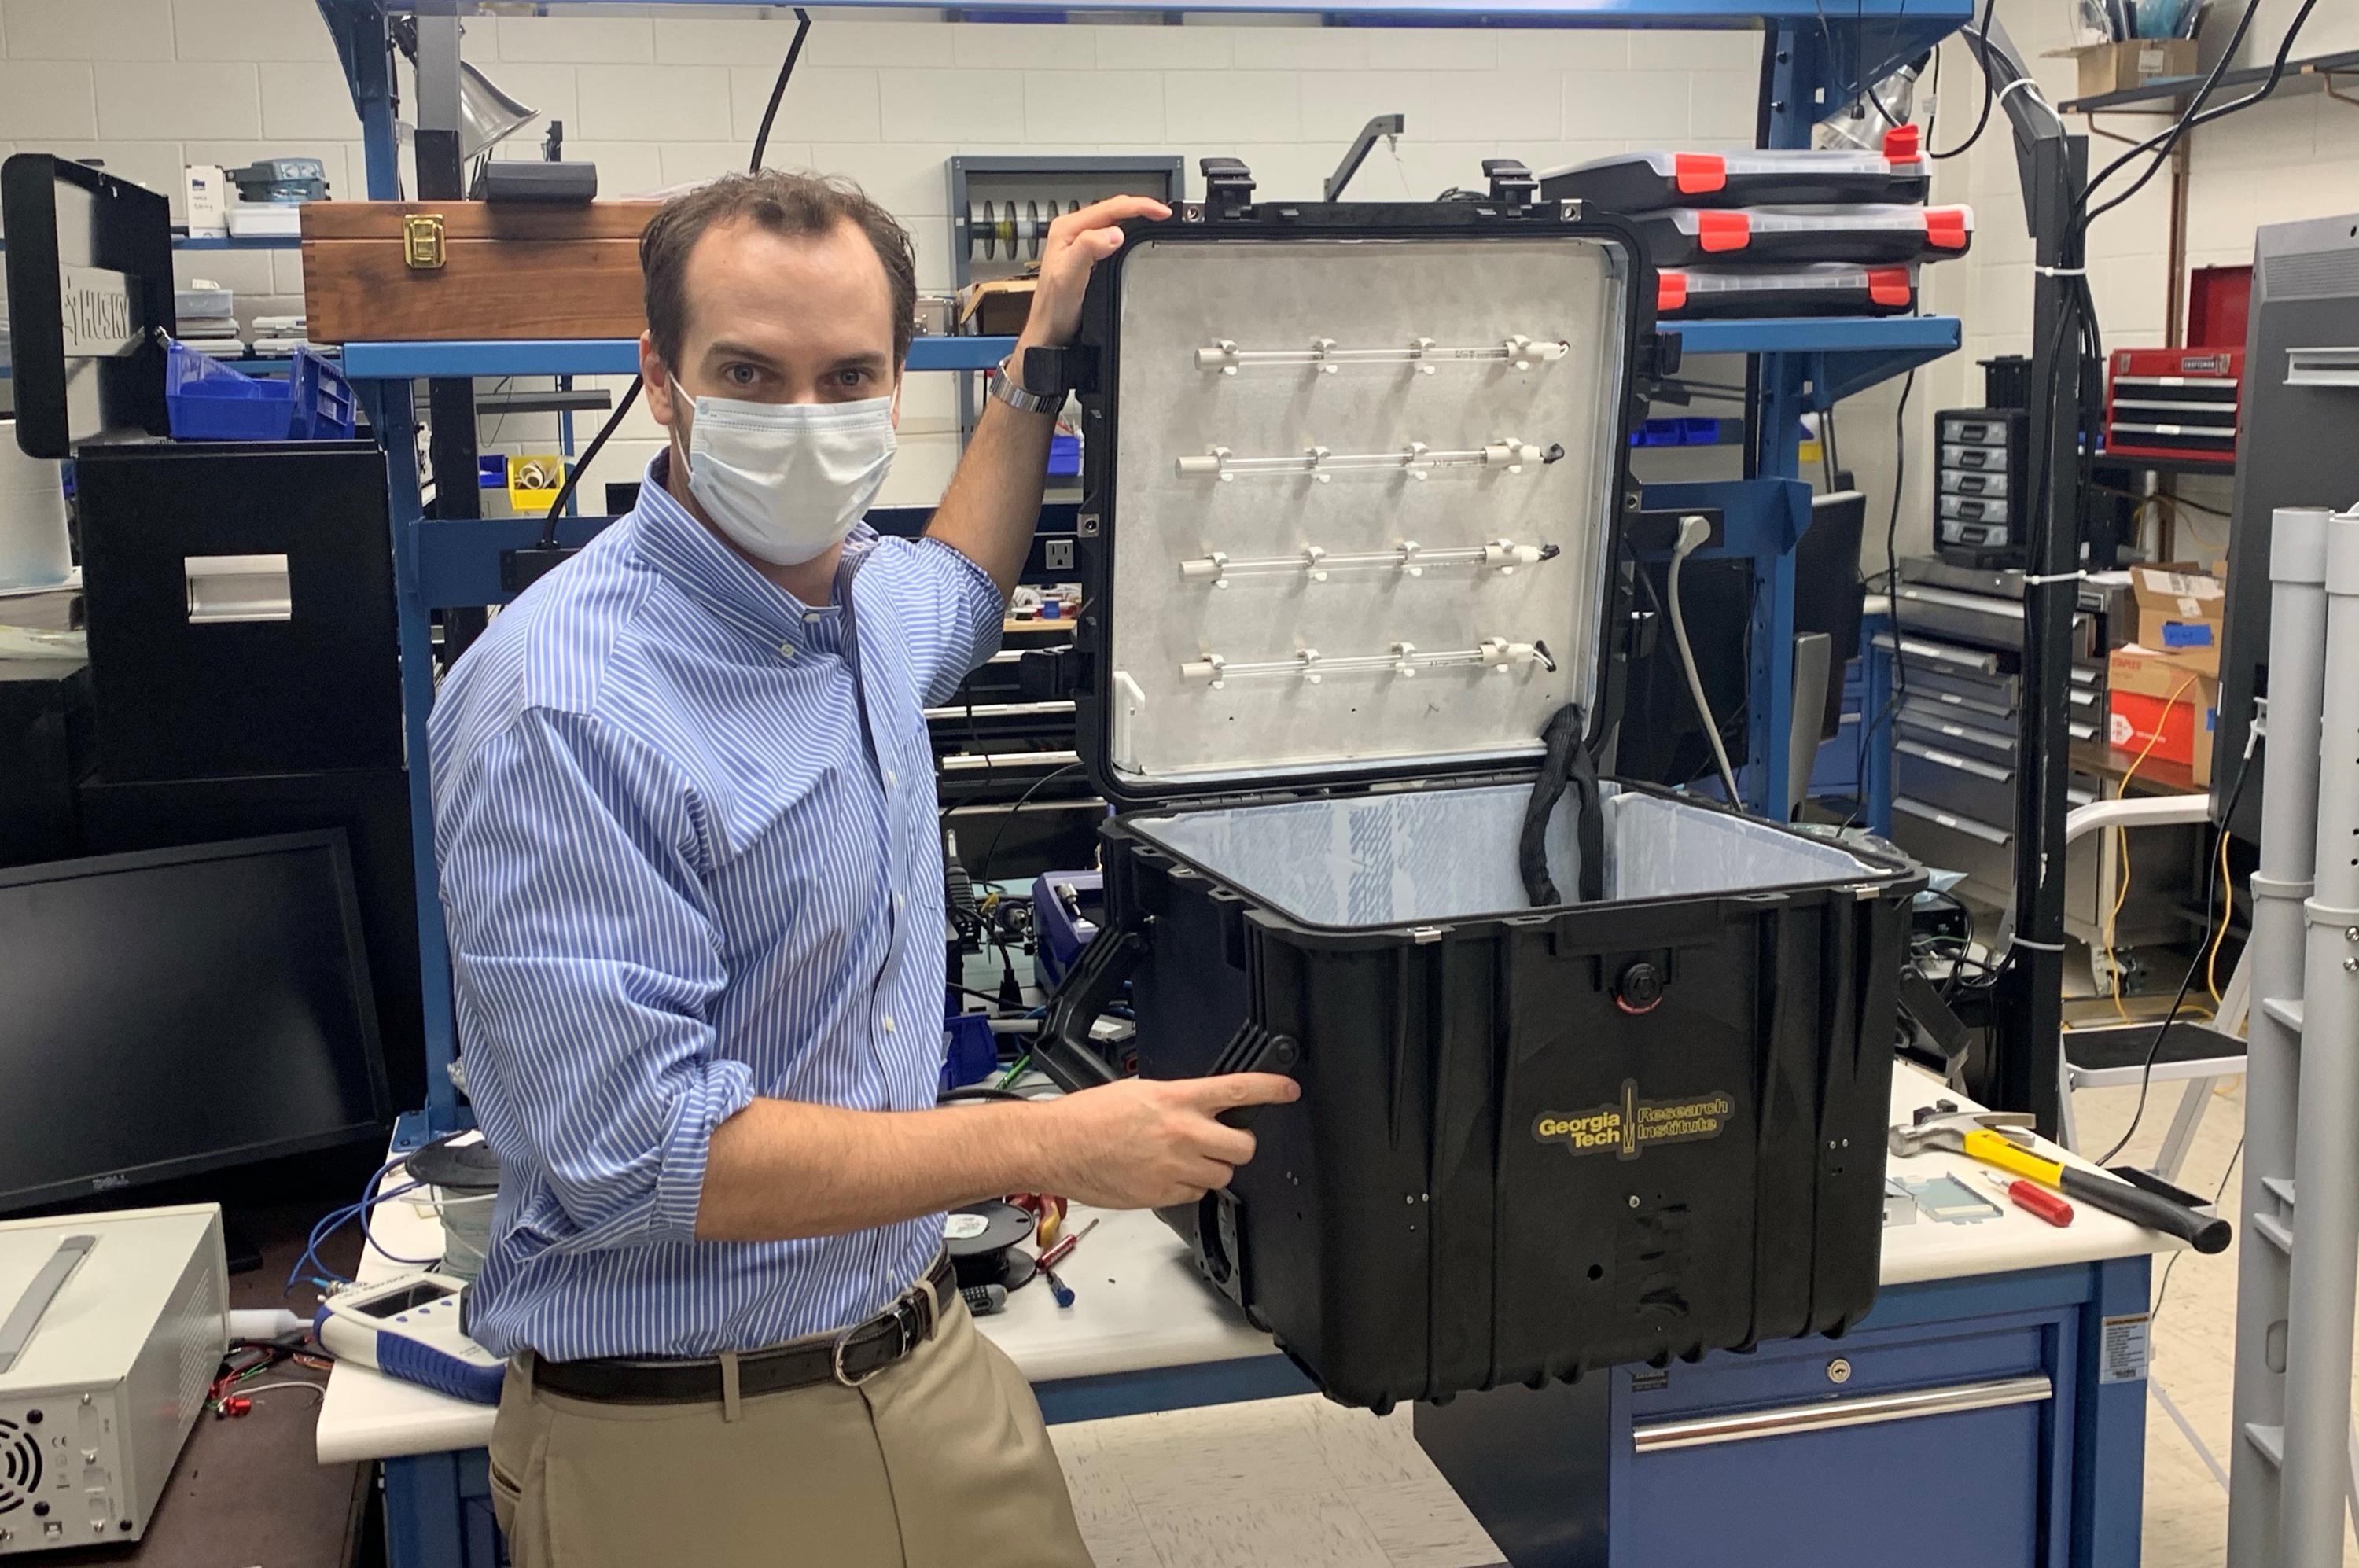 GTRI researcher Robert Harris shows the prototype portable UV disinfection chamber, which was designed to hold at least one face shield along with face masks. (Credit: John Stone)